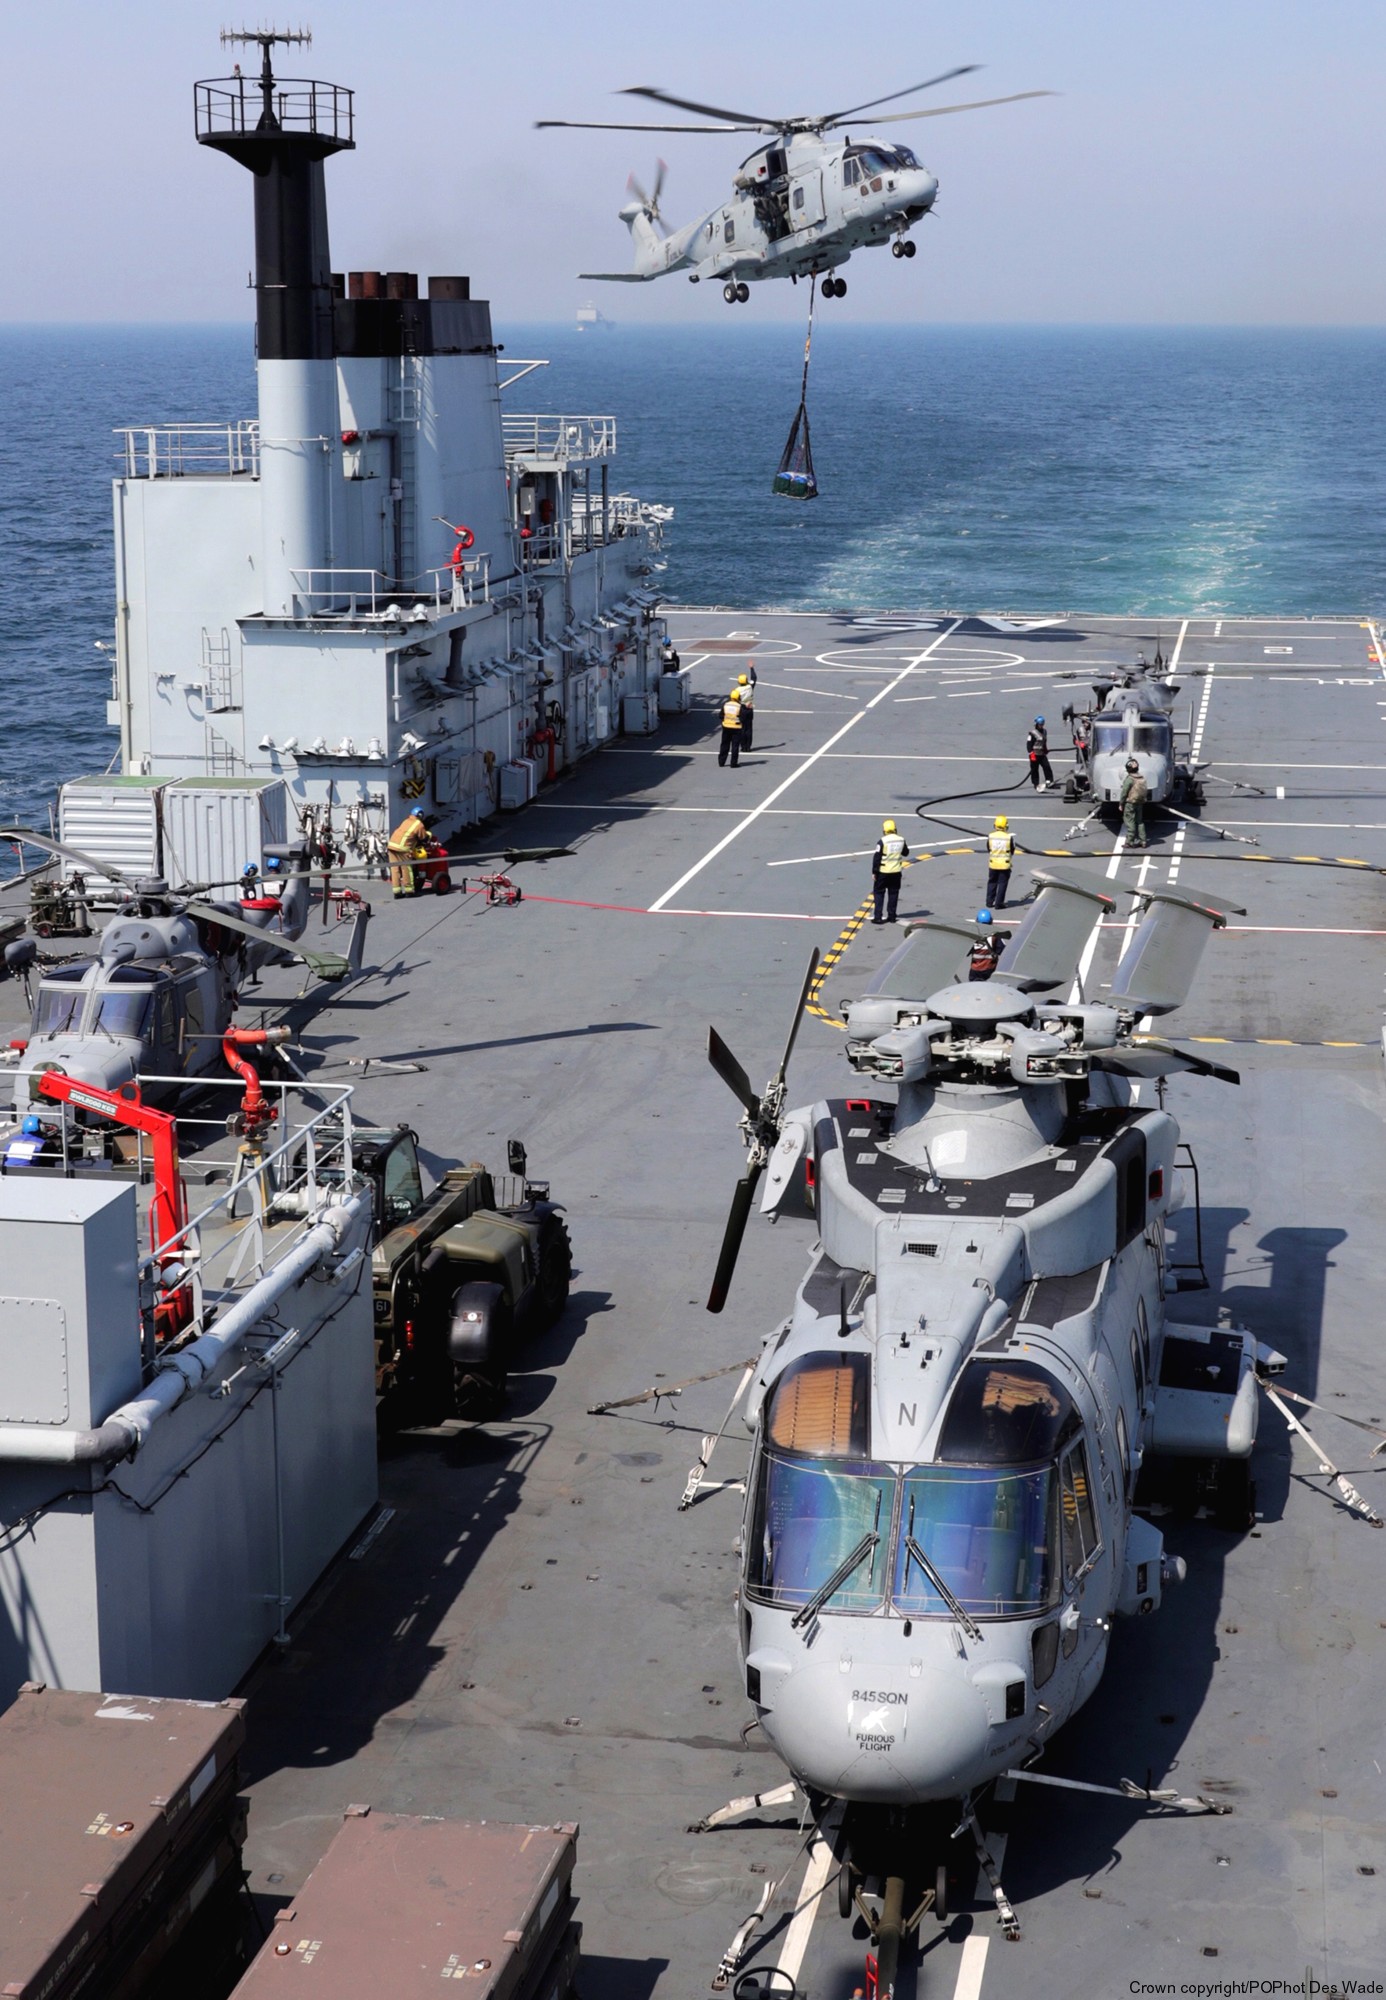 a 135 rfa argus casualty receiving ship support royal fleet auxilary navy 17 flight deck operations